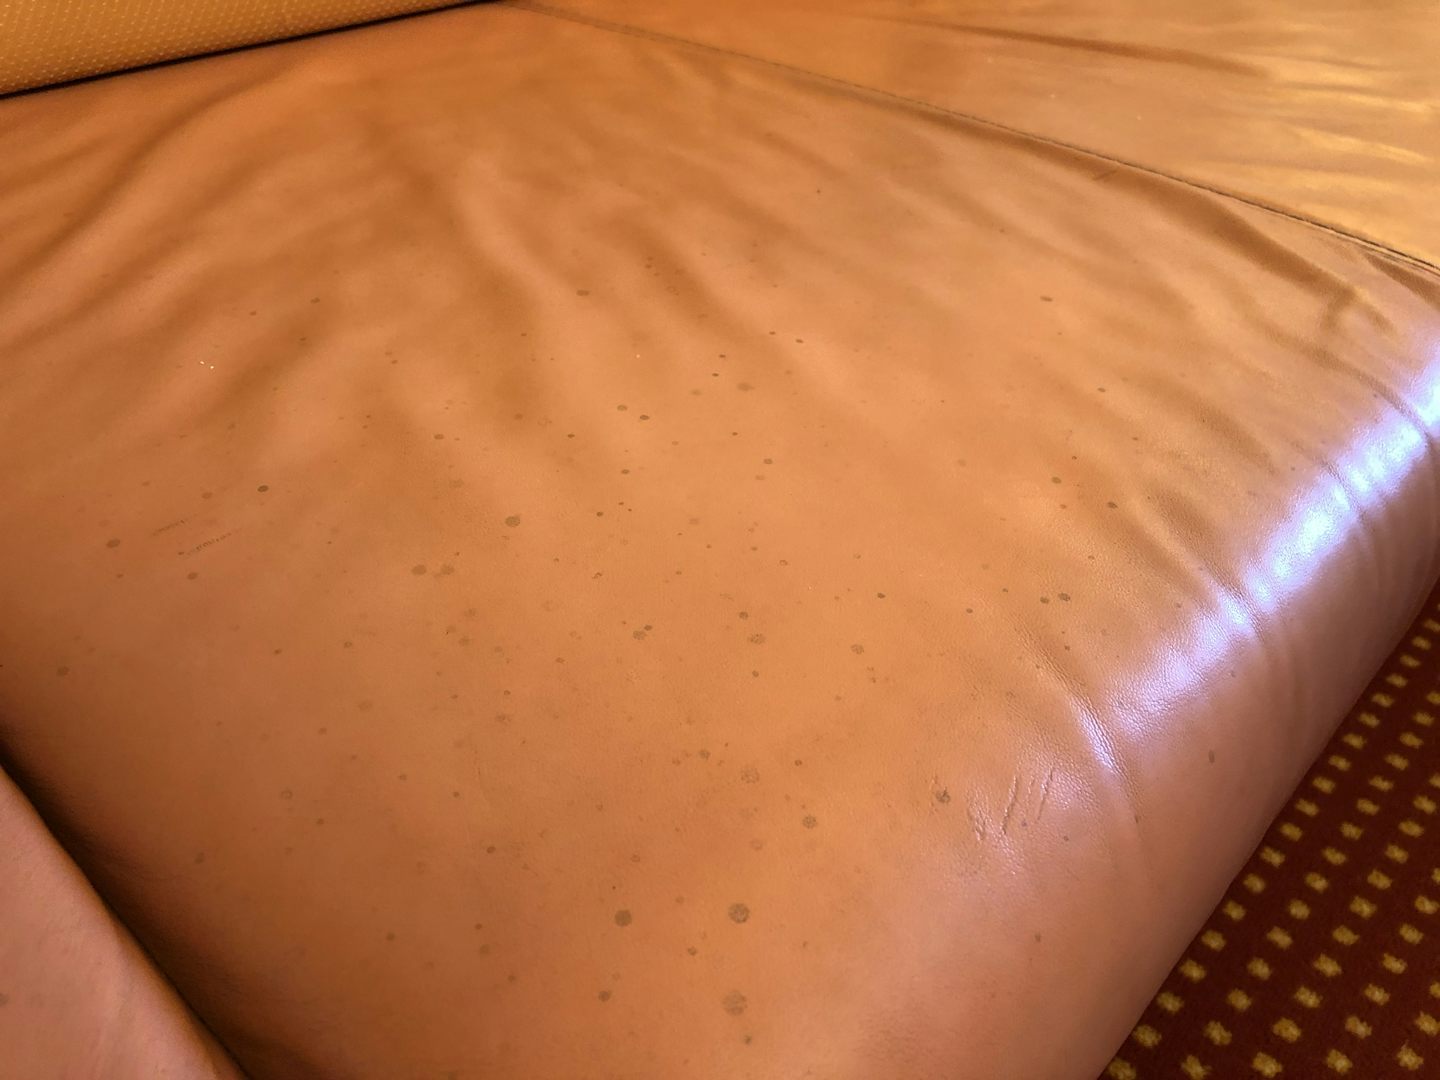 The couch was was stained and nasty